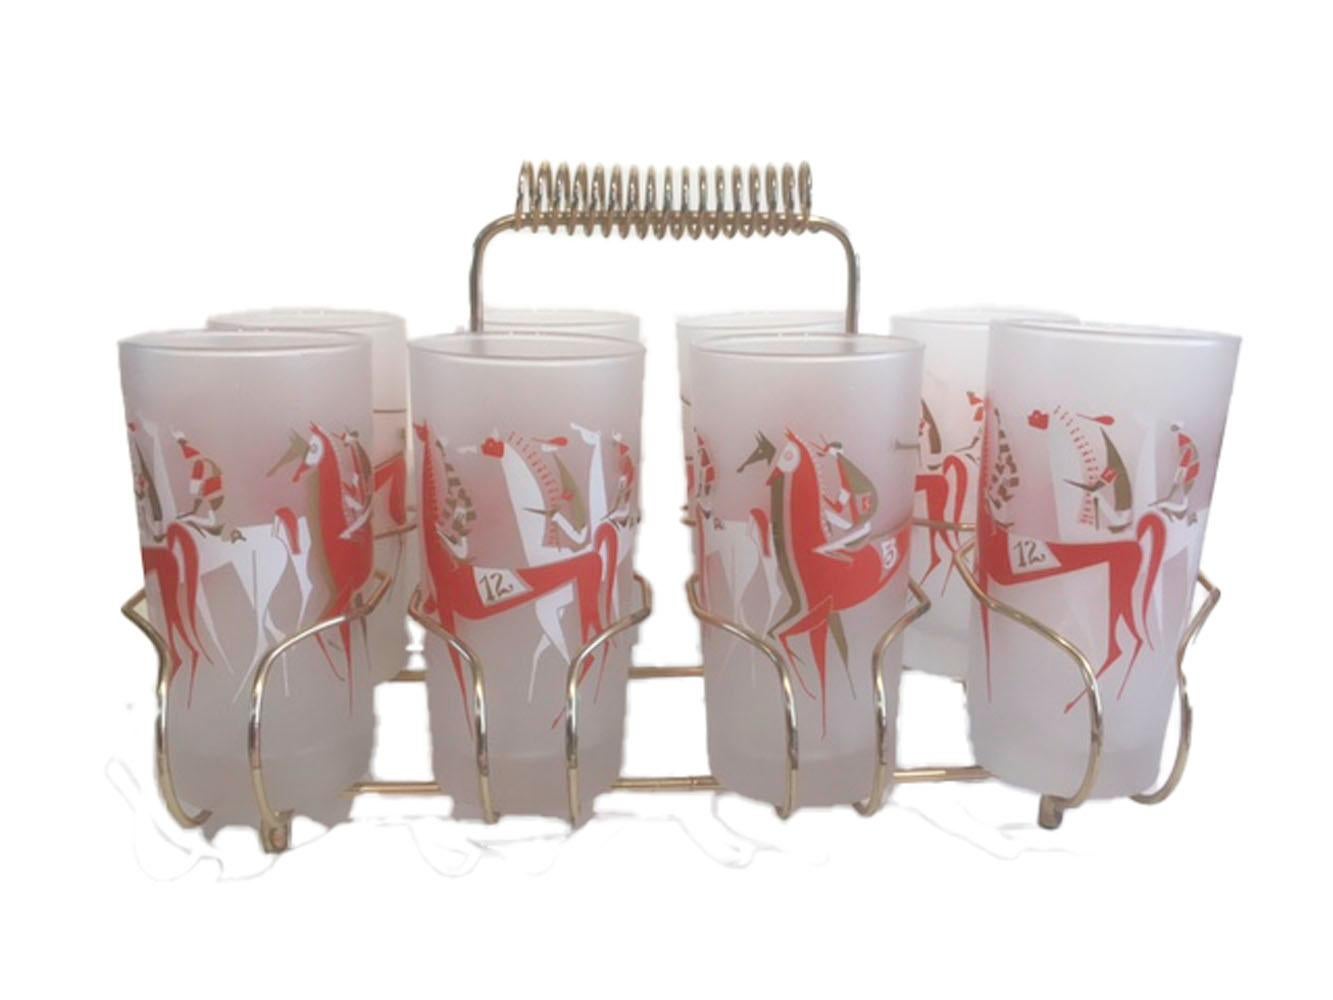 American Rare Set of 8 Libbey Highball Glasses in the Longchamps Pattern in a Caddy